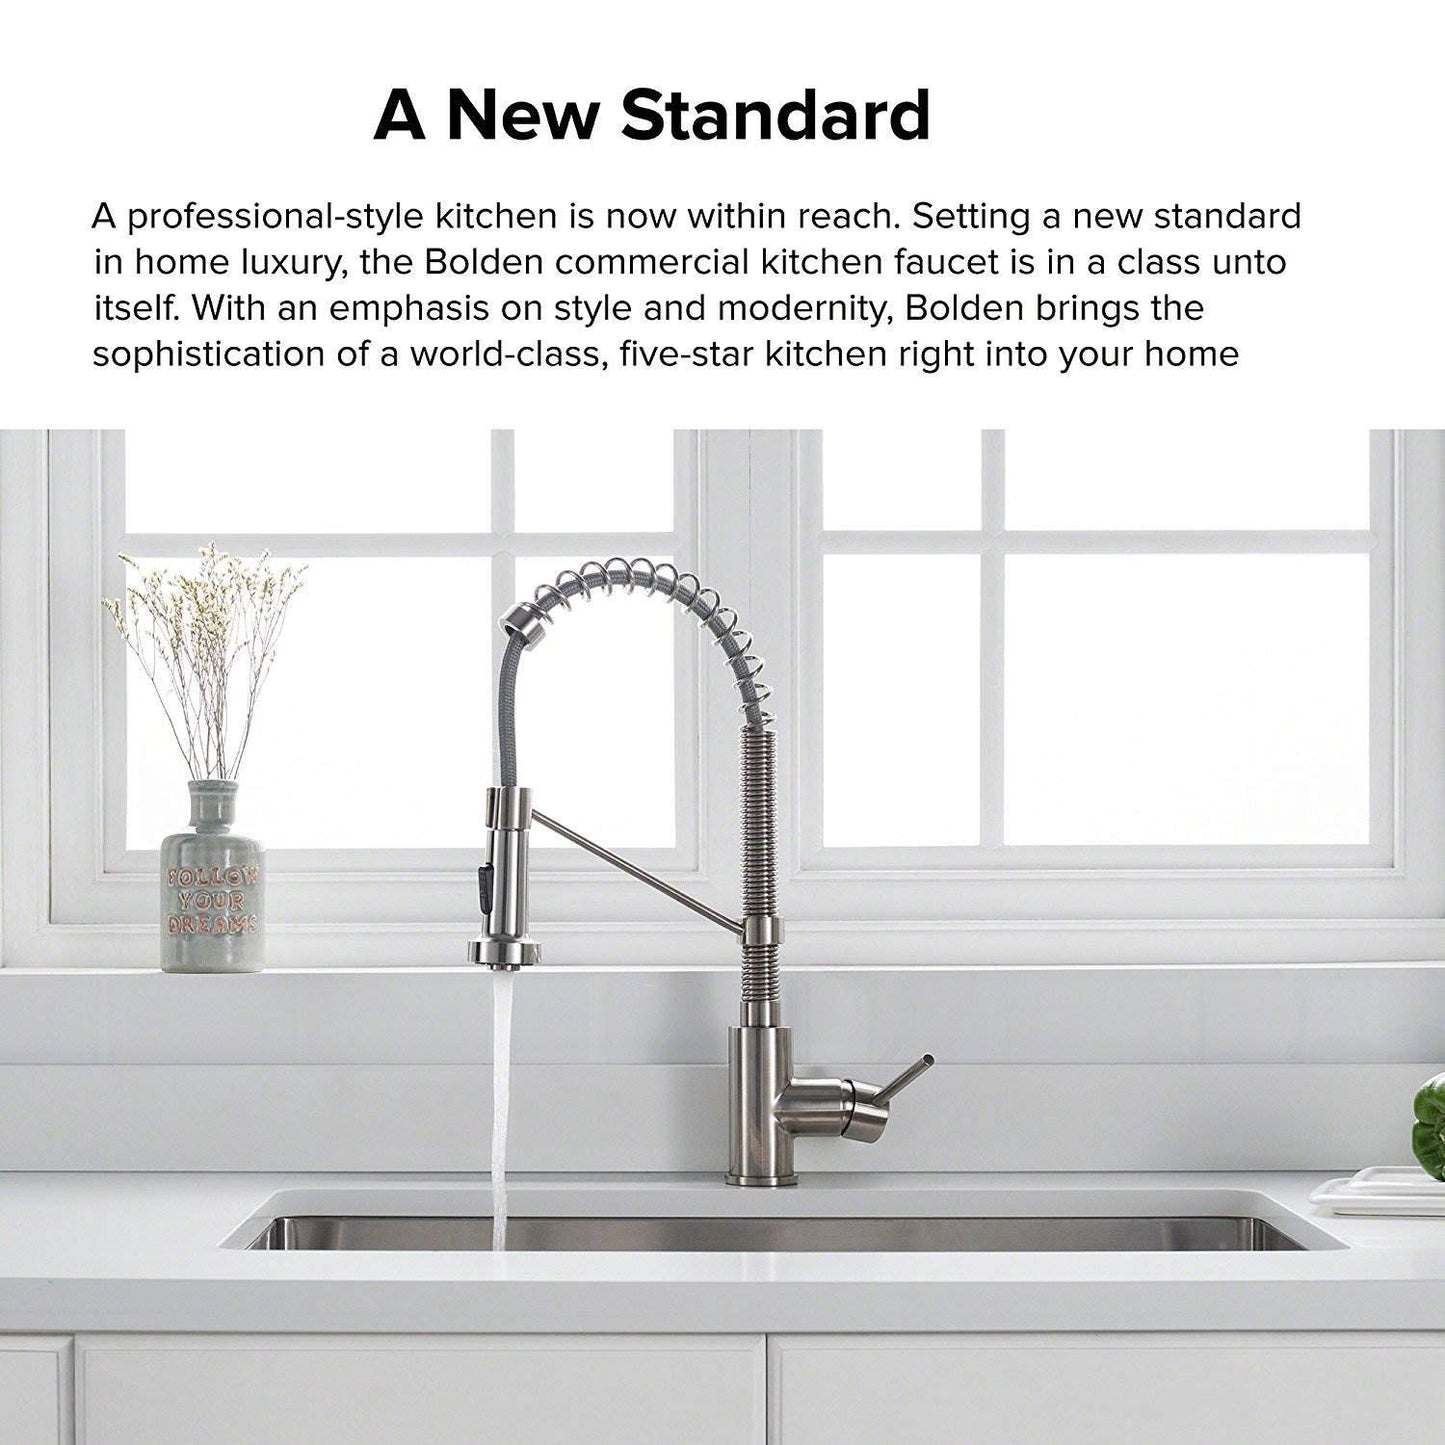 Kraus KPF-1610SS Bolden 18-Inch Commercial Kitchen Faucet with Dual Function Pull-Down Sprayhead in All-Brite Finish, Stainless Steel